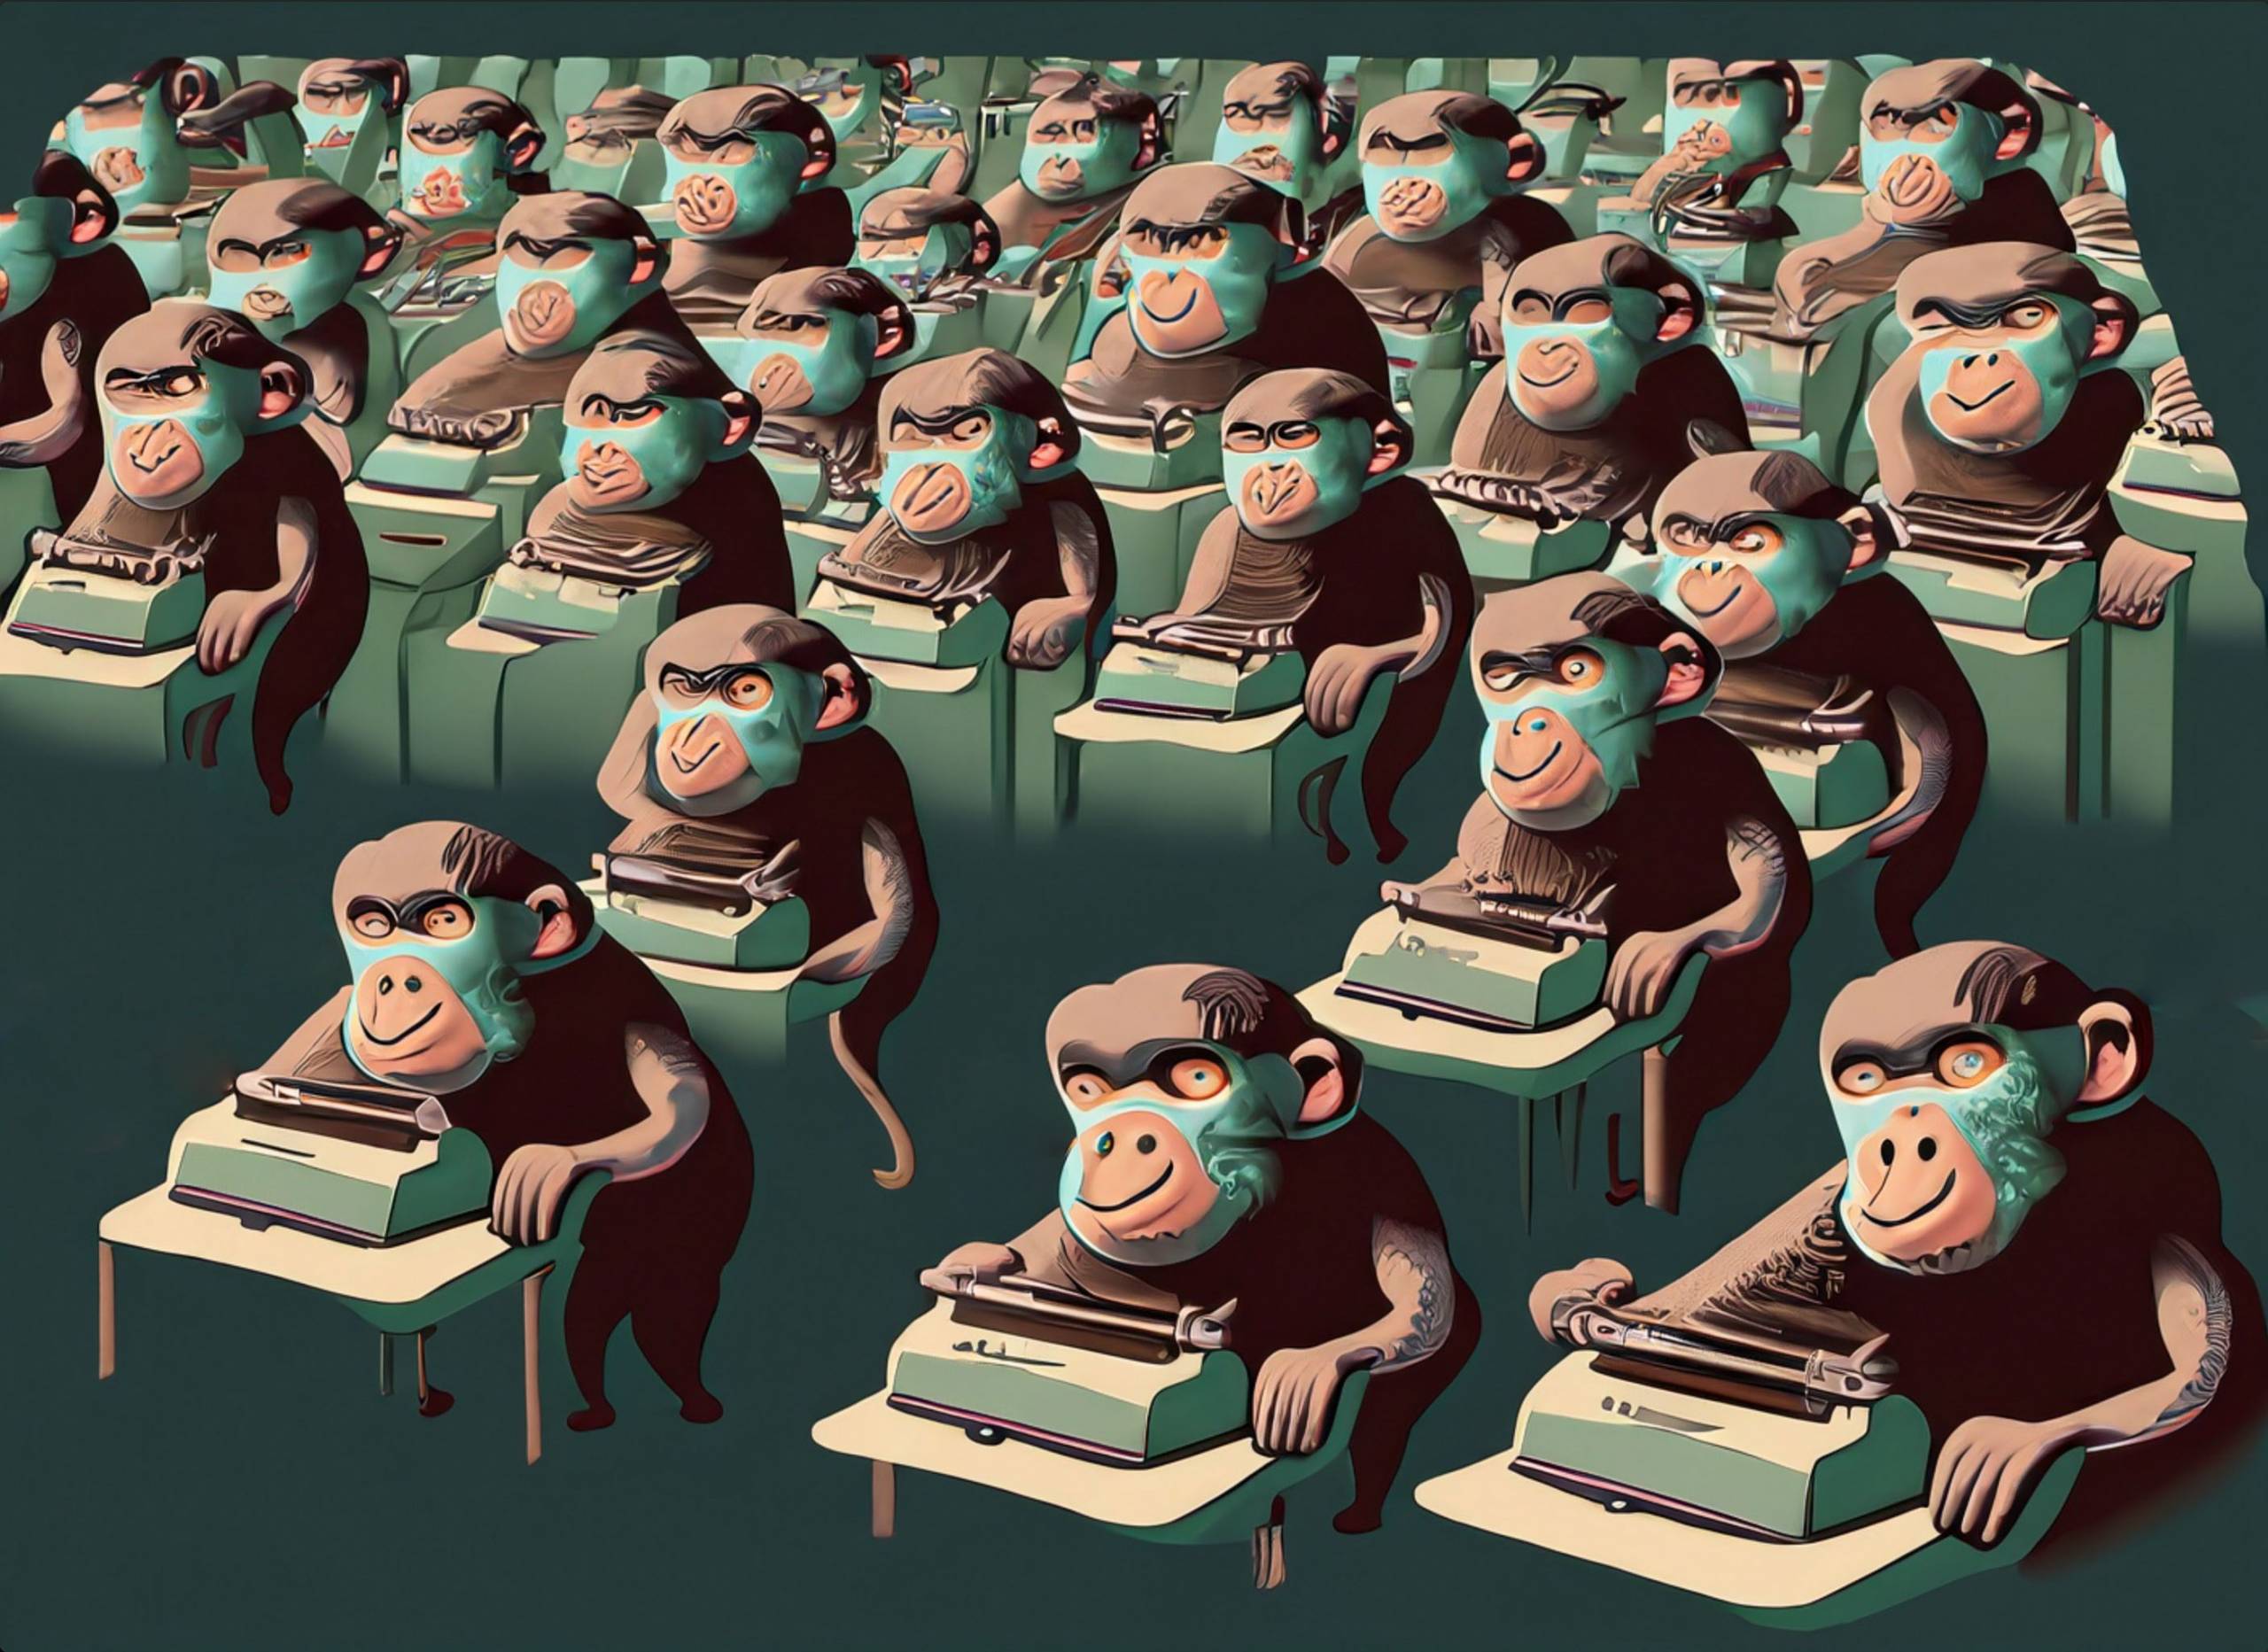 Give 1,000 monkeys 1,000 typewriters and one of them will write a Shakespeare play